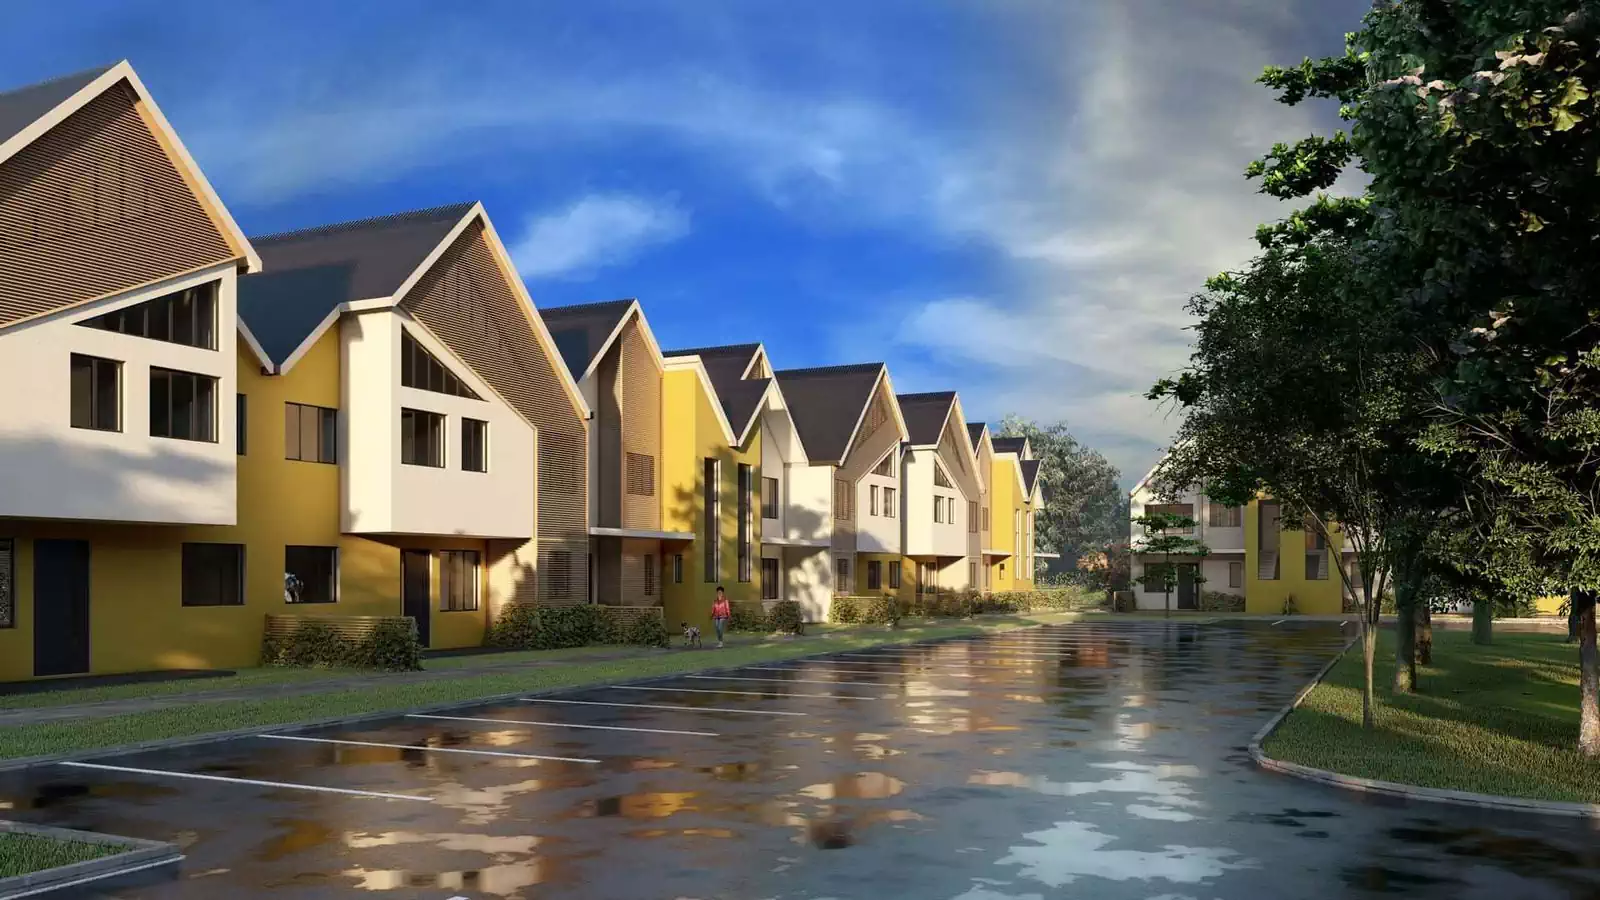 Alternating town home designs for 3 and 2 bedroom units in brightly coloured housing complex in Harare